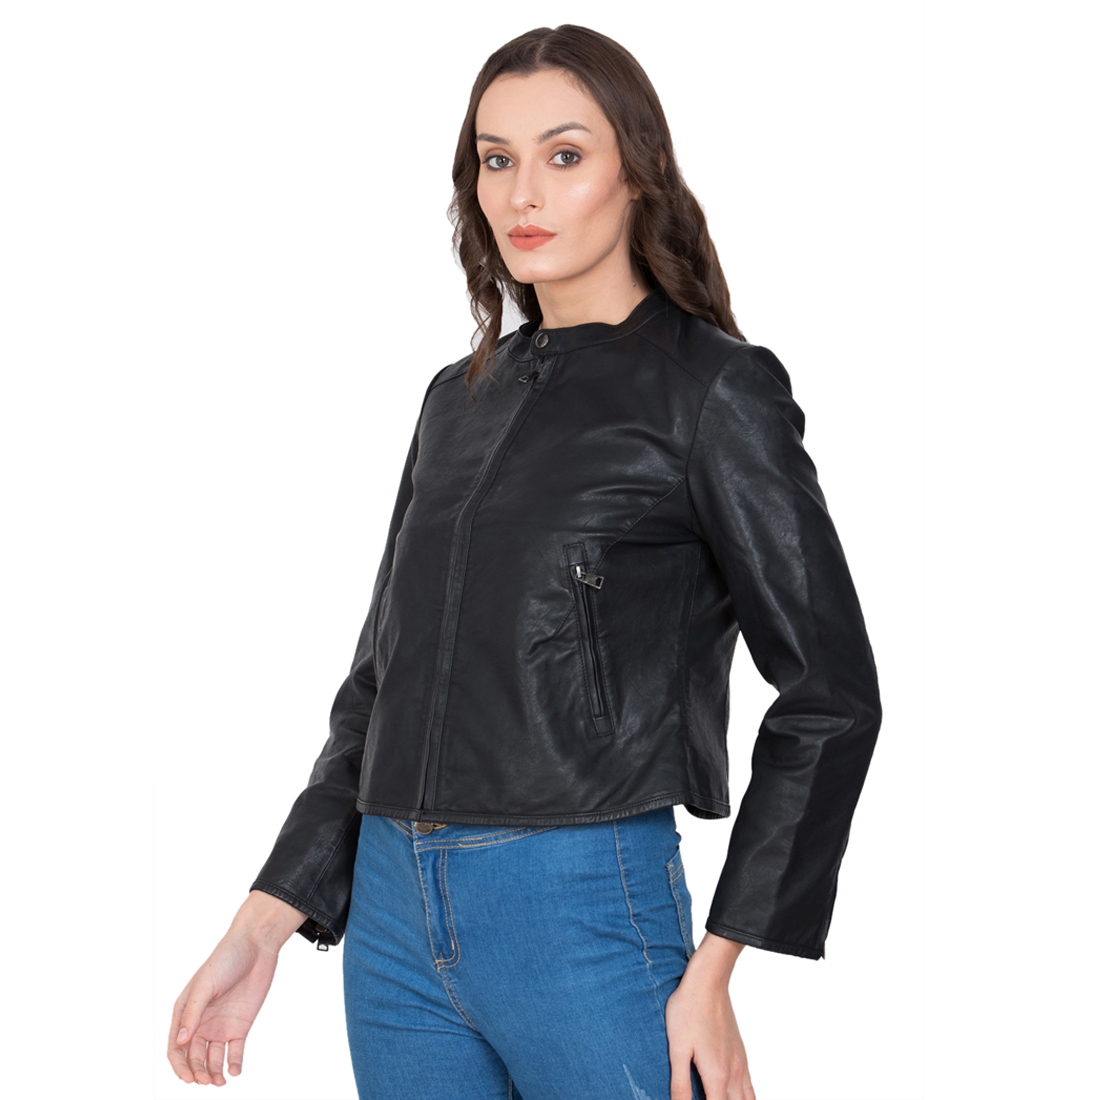 Justanned | JUSTANNED CHARCOAL WOMEN LEATHER JACKET 2